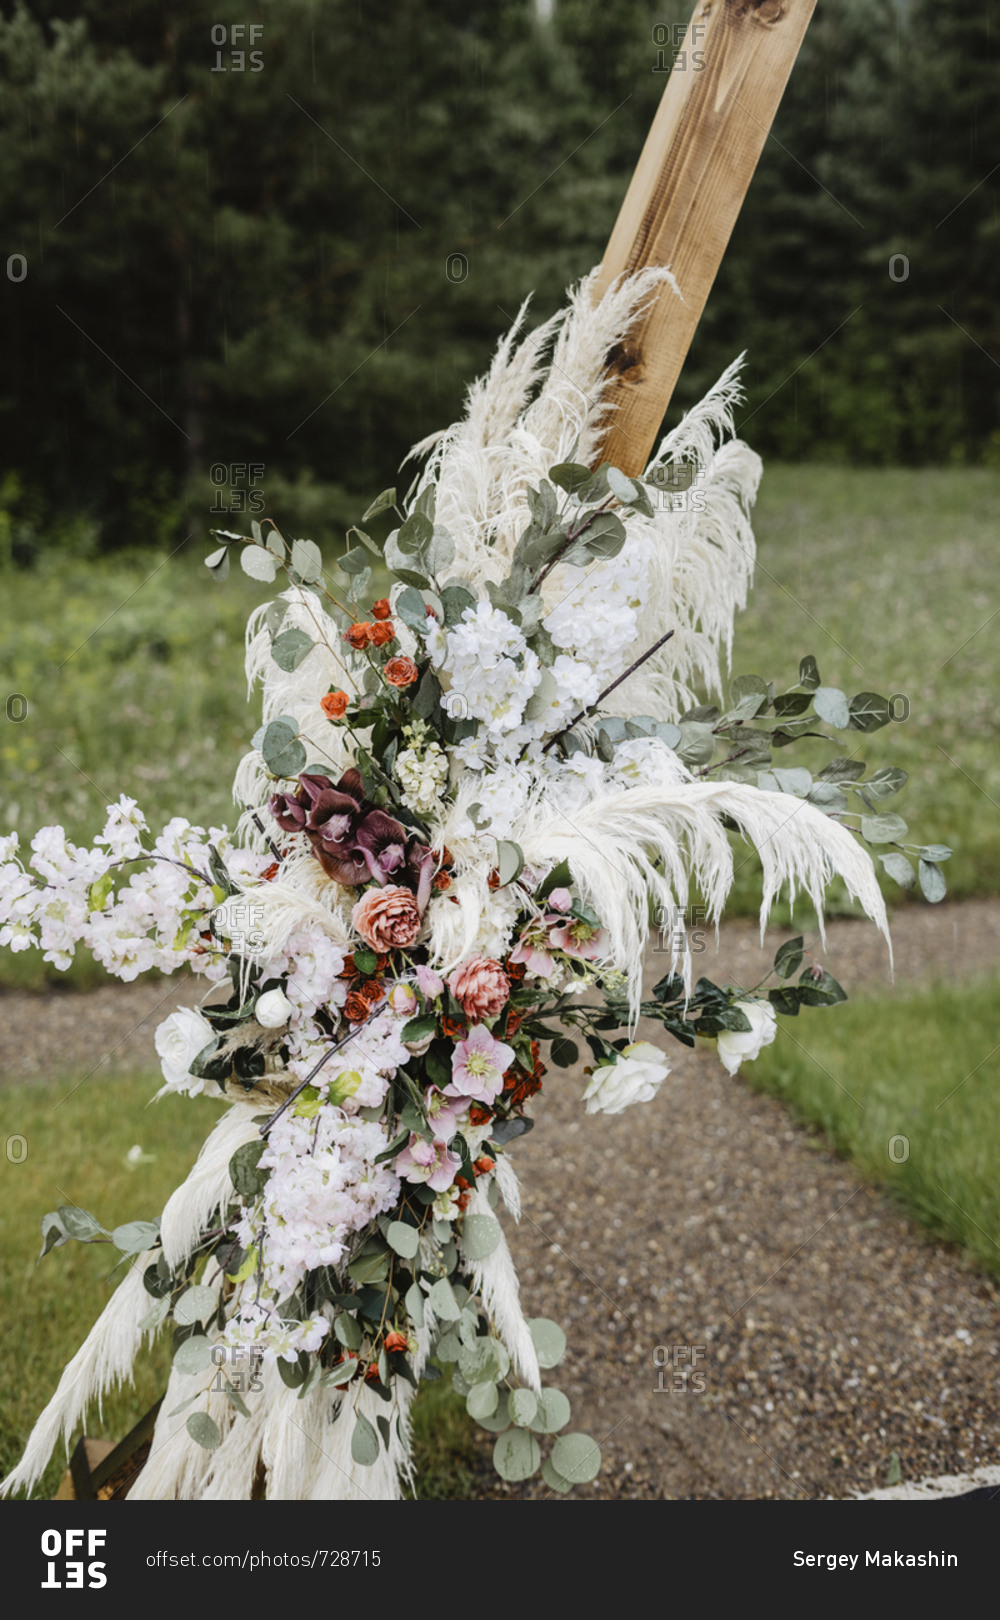 Floral arrangement at a country wedding ceremony